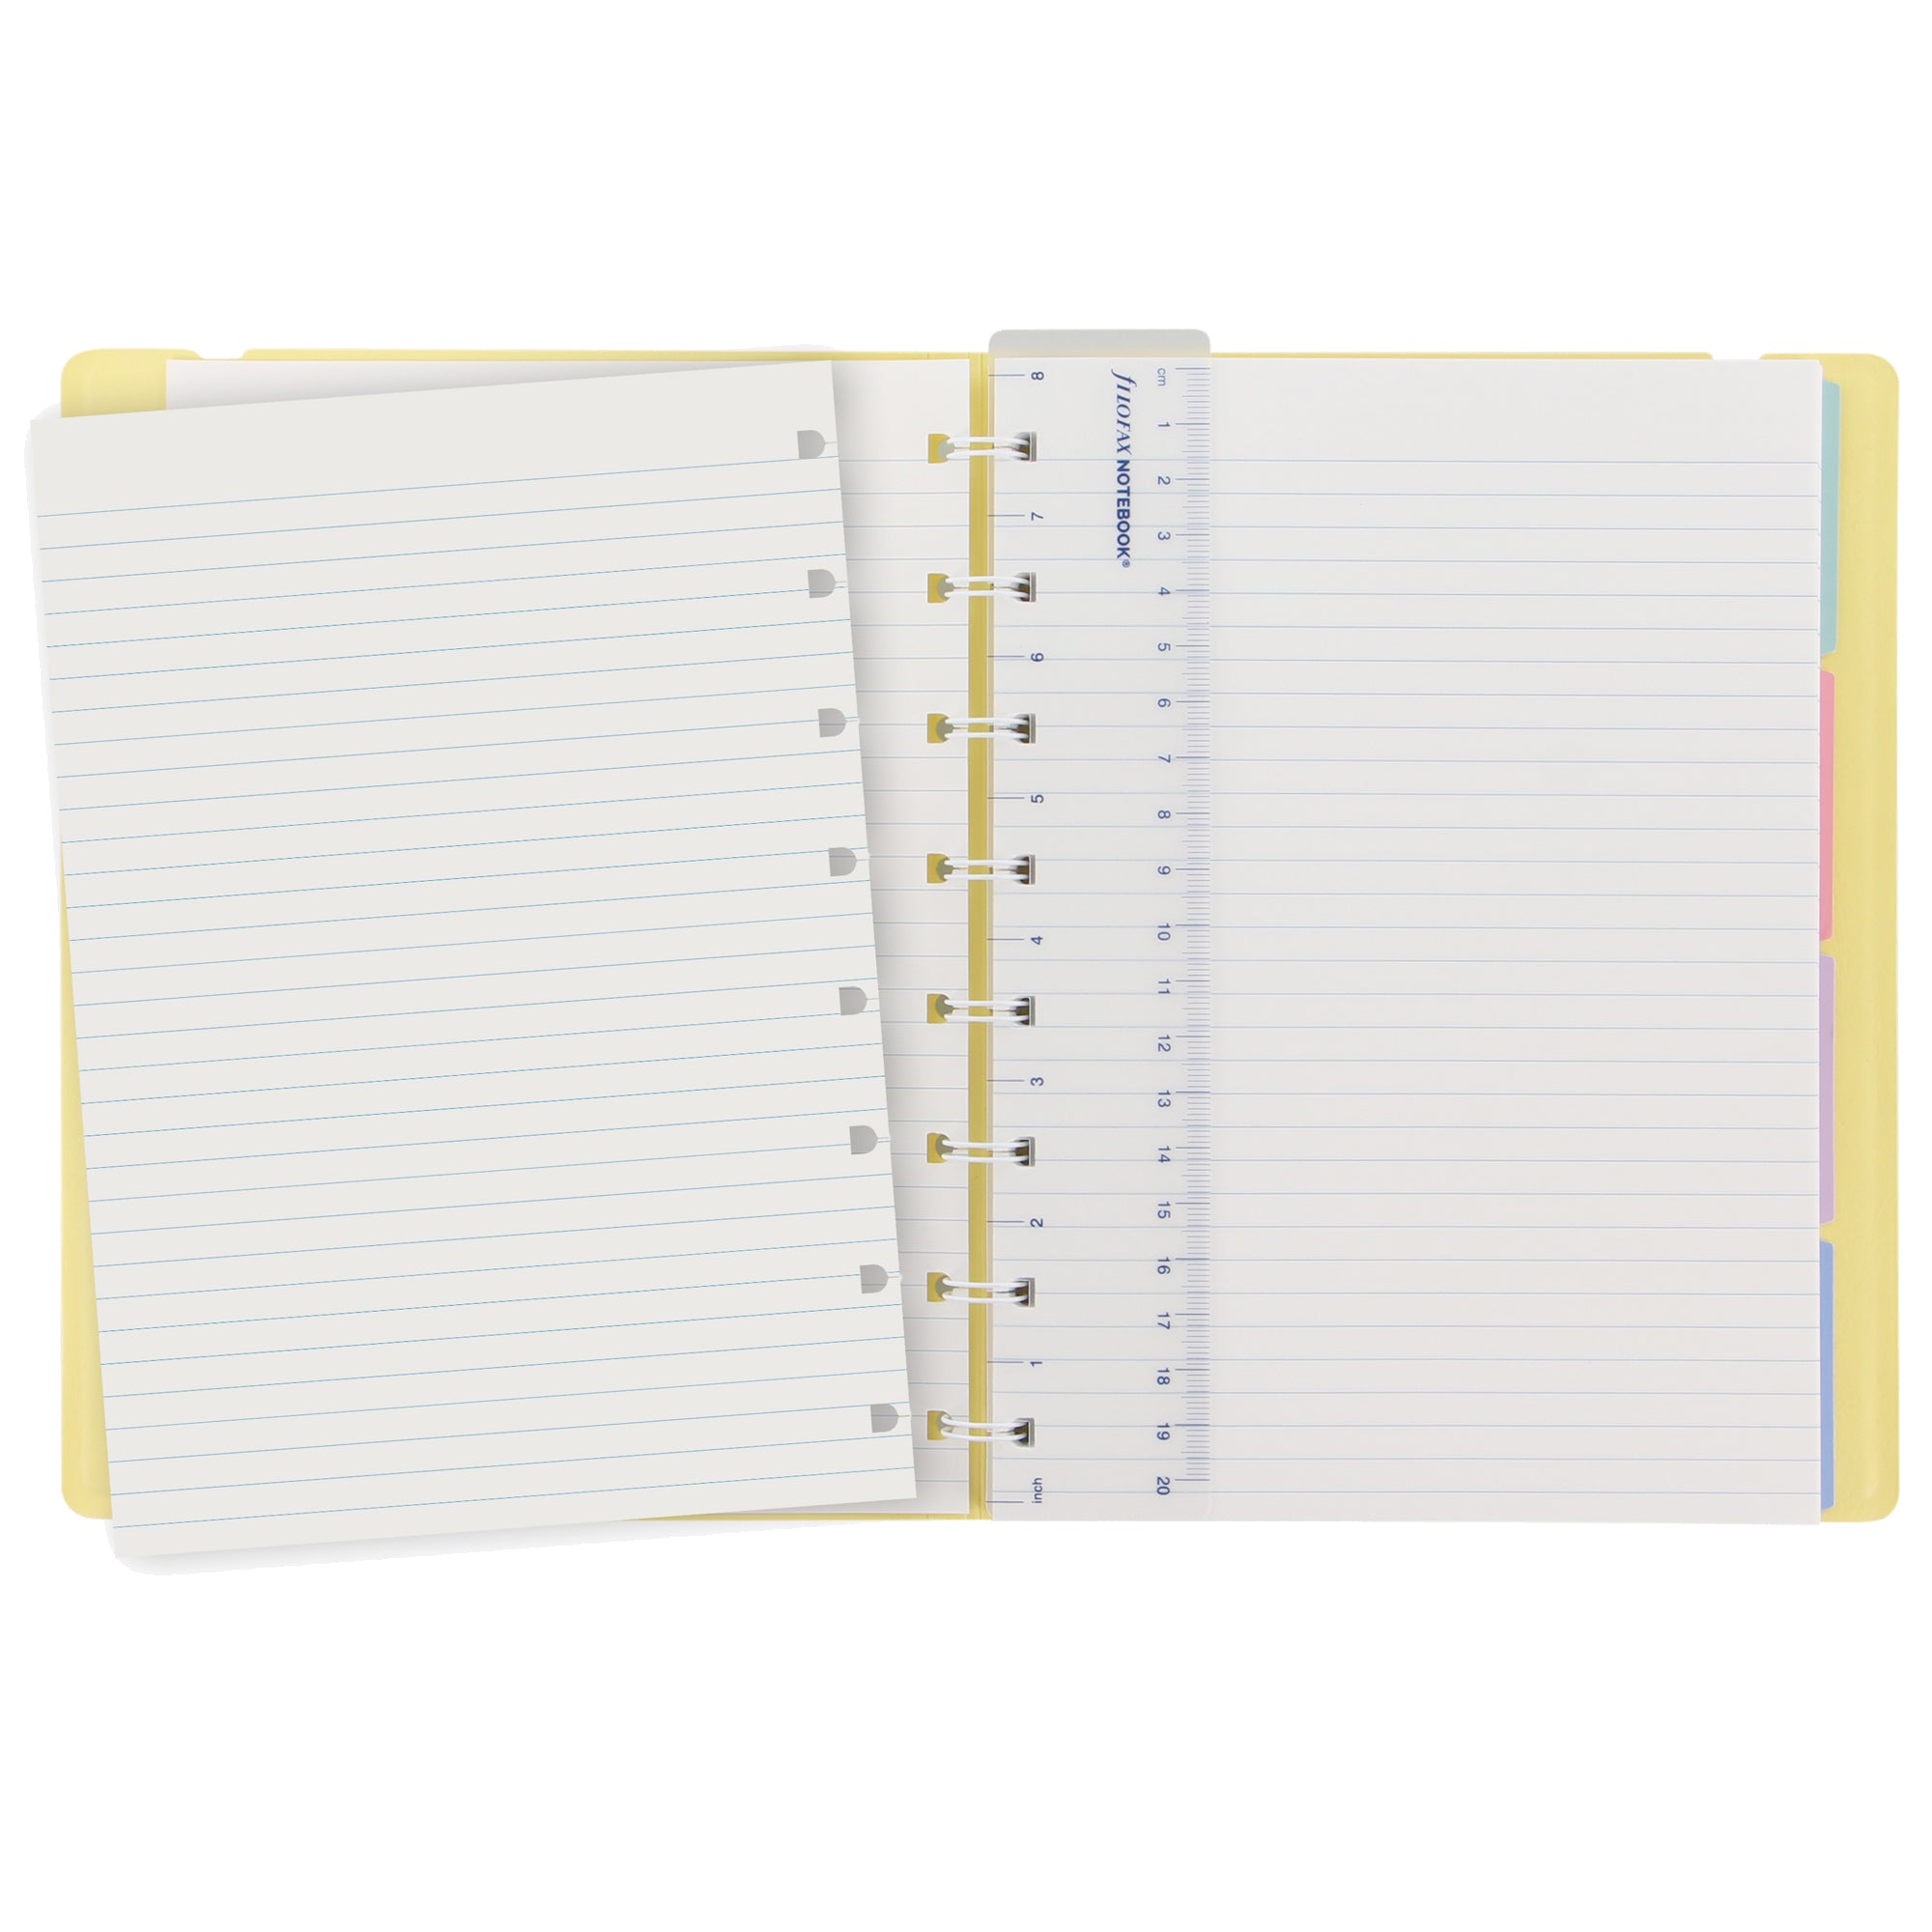 filofax-notebook-f-to-a5-righe-56-pag-giallo-limone-similpelle